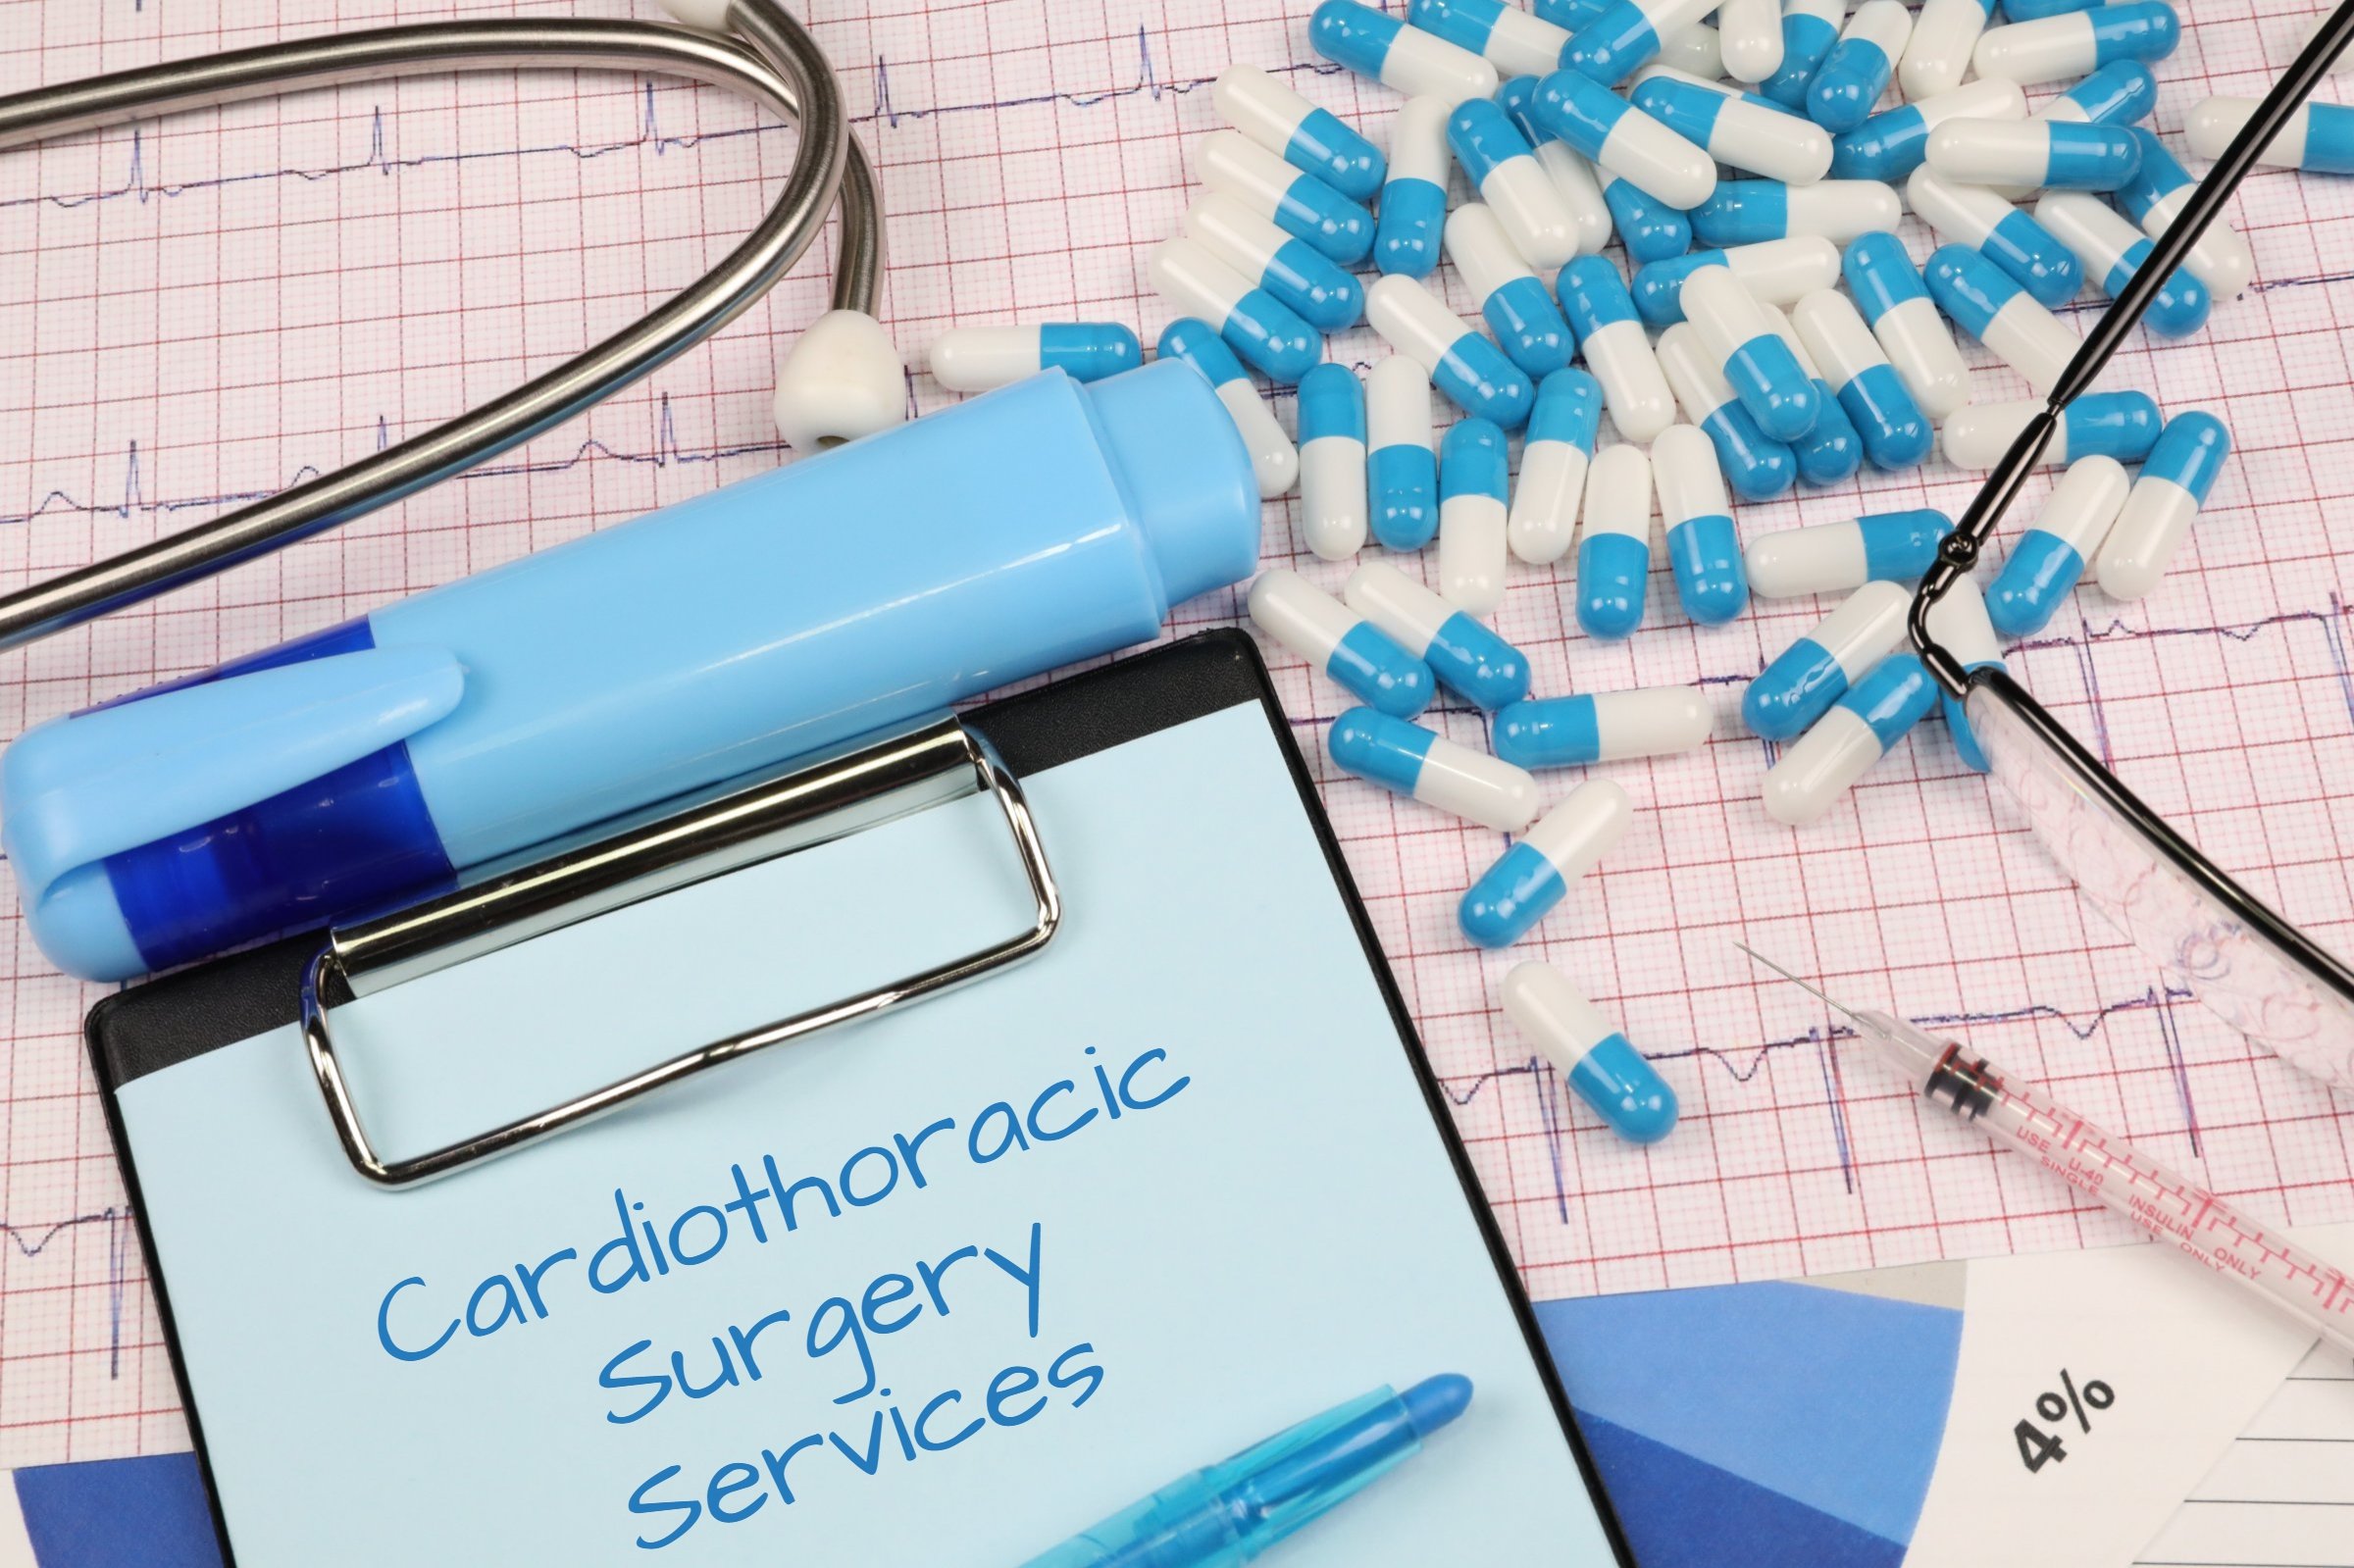 cardiothoracic surgery services